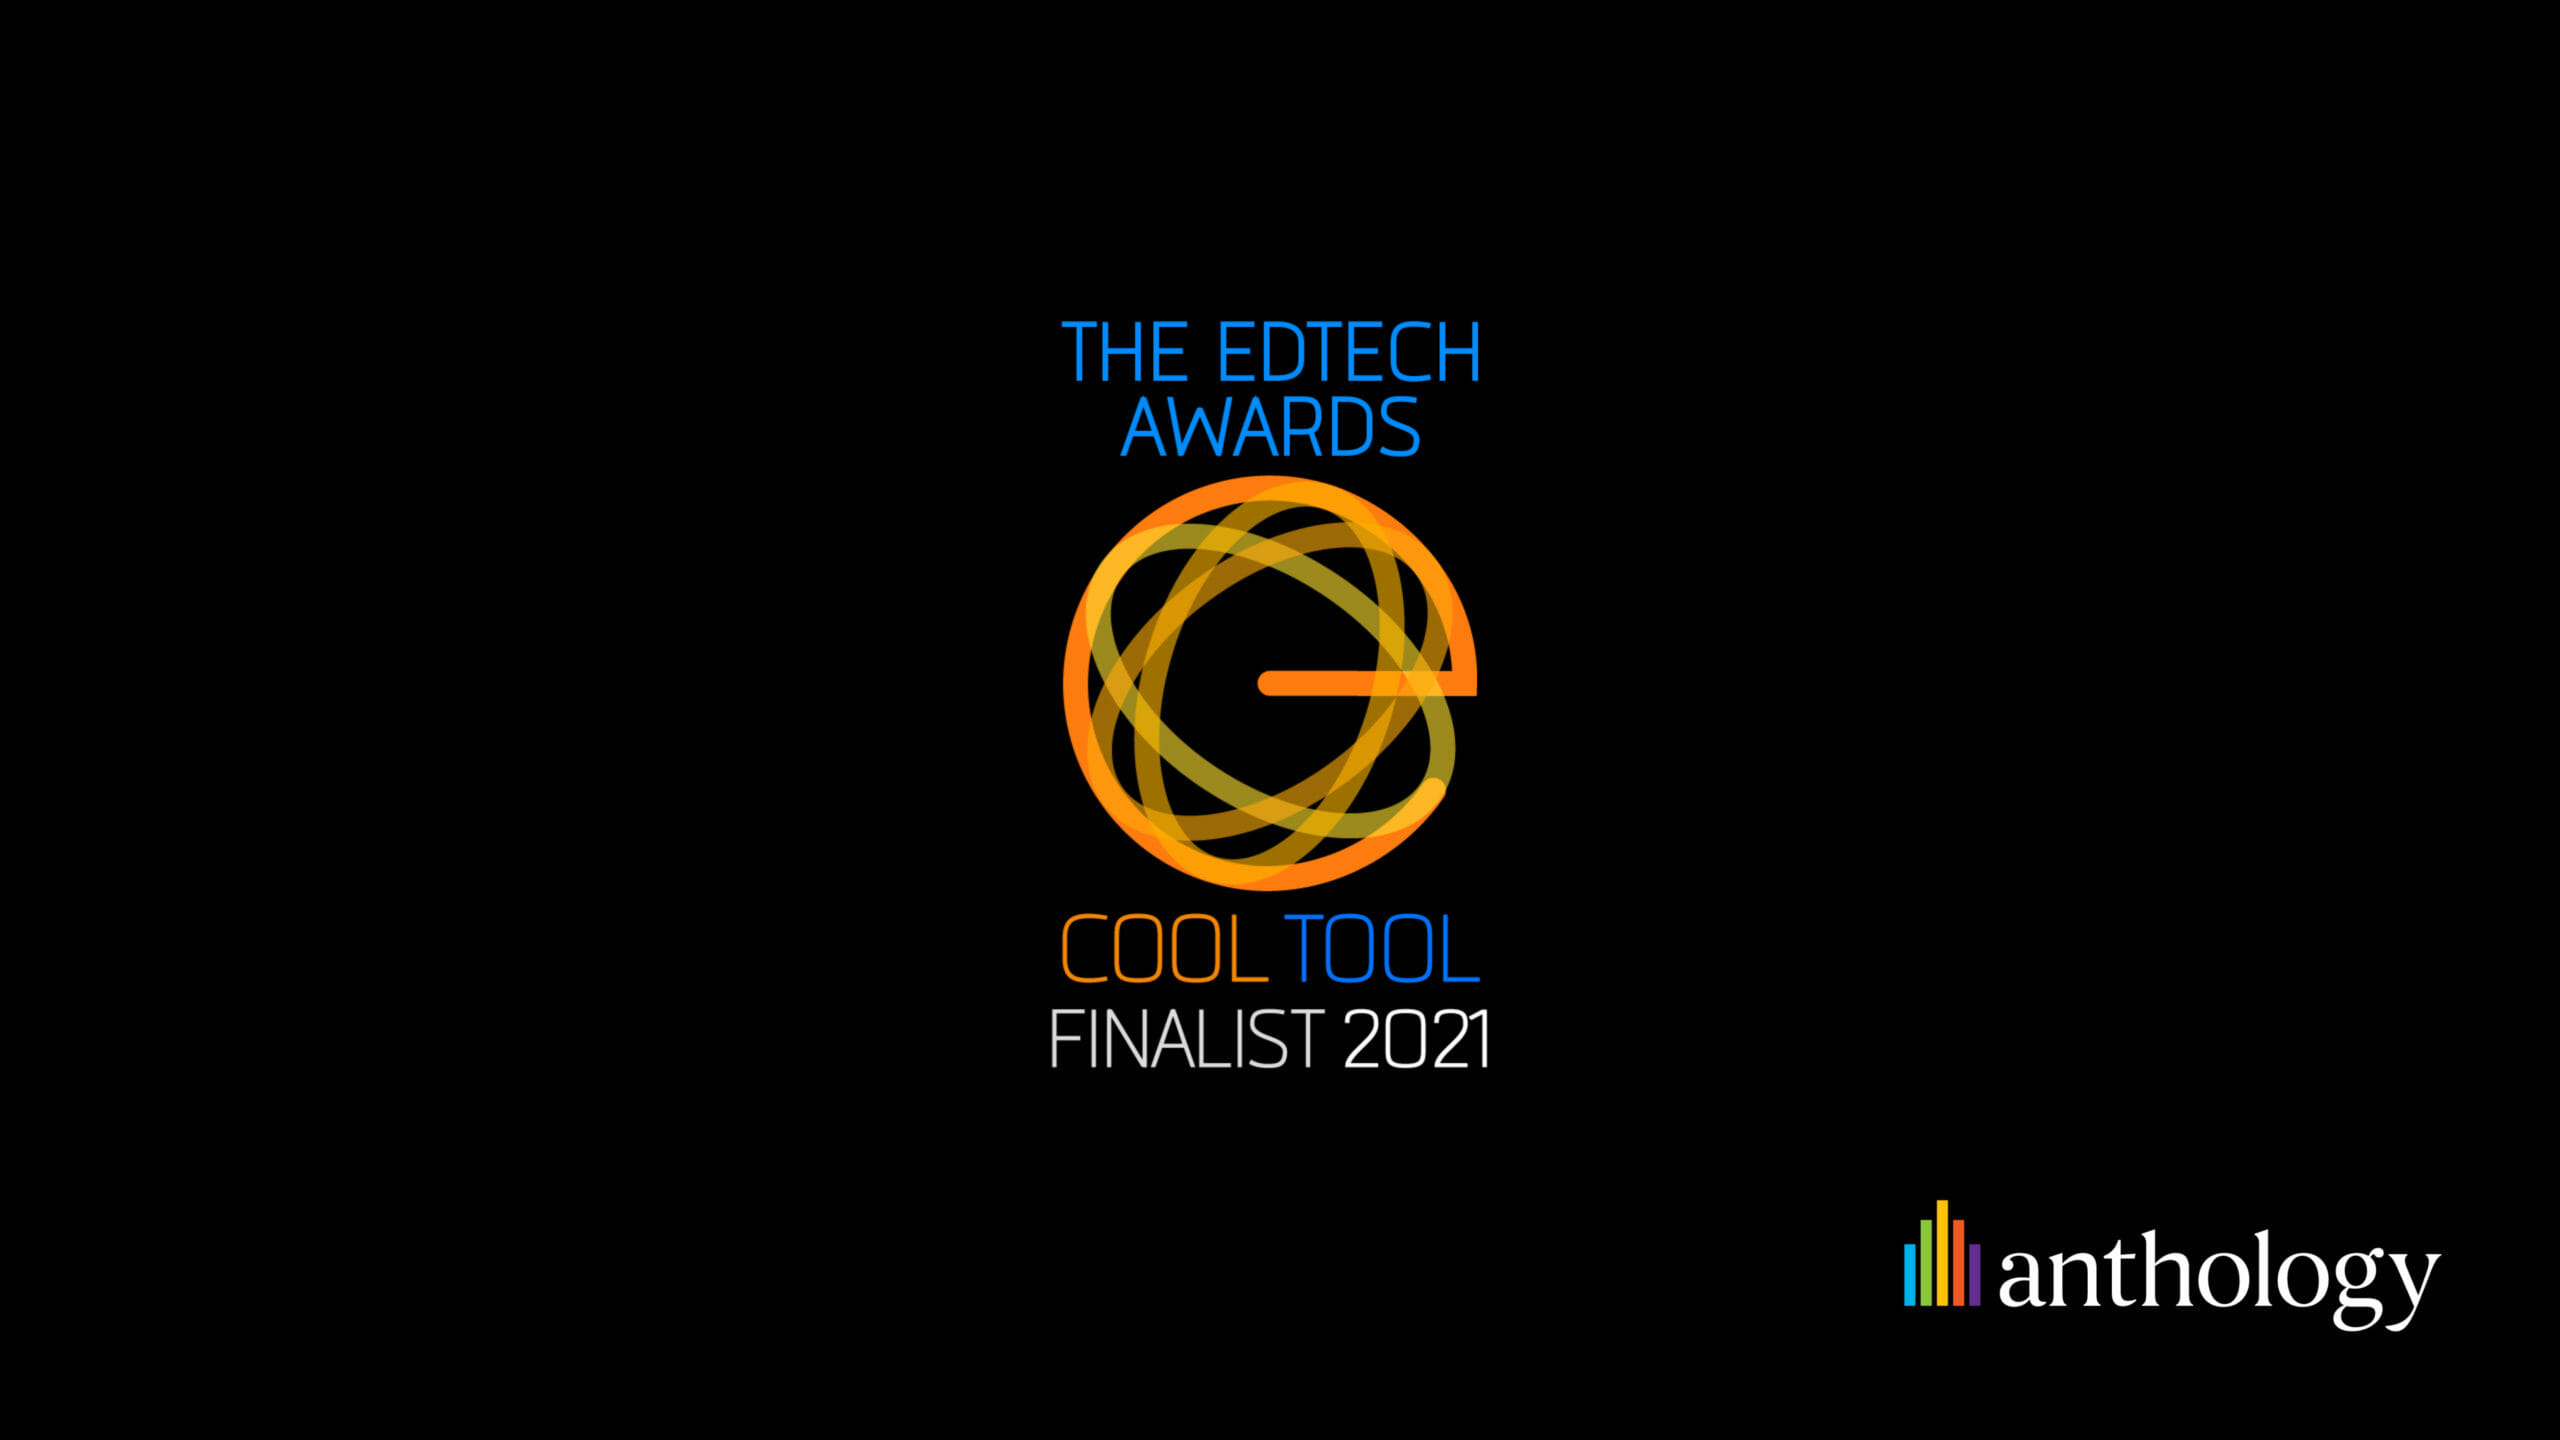 Illustration with the text The Edtech Awards Cool Tool Finalist 2021